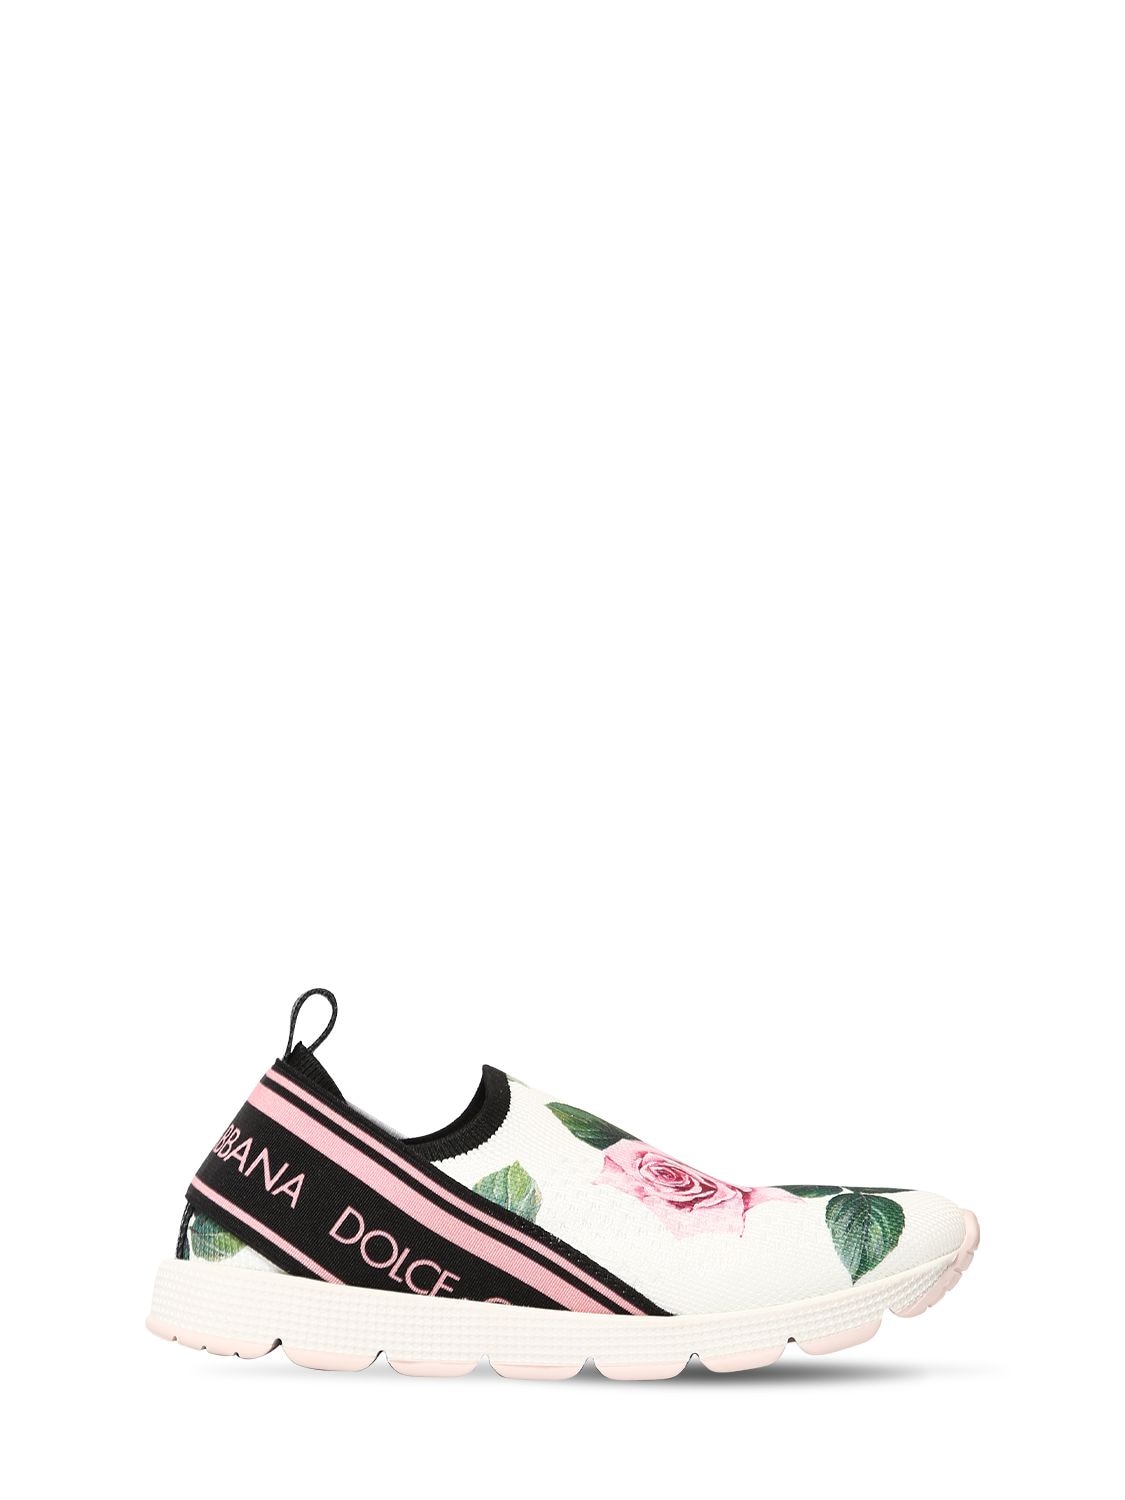 DOLCE & GABBANA ROSE PRINTED KNIT SLIP-ON SNEAKERS,71I6T9035-SEE5NKM1